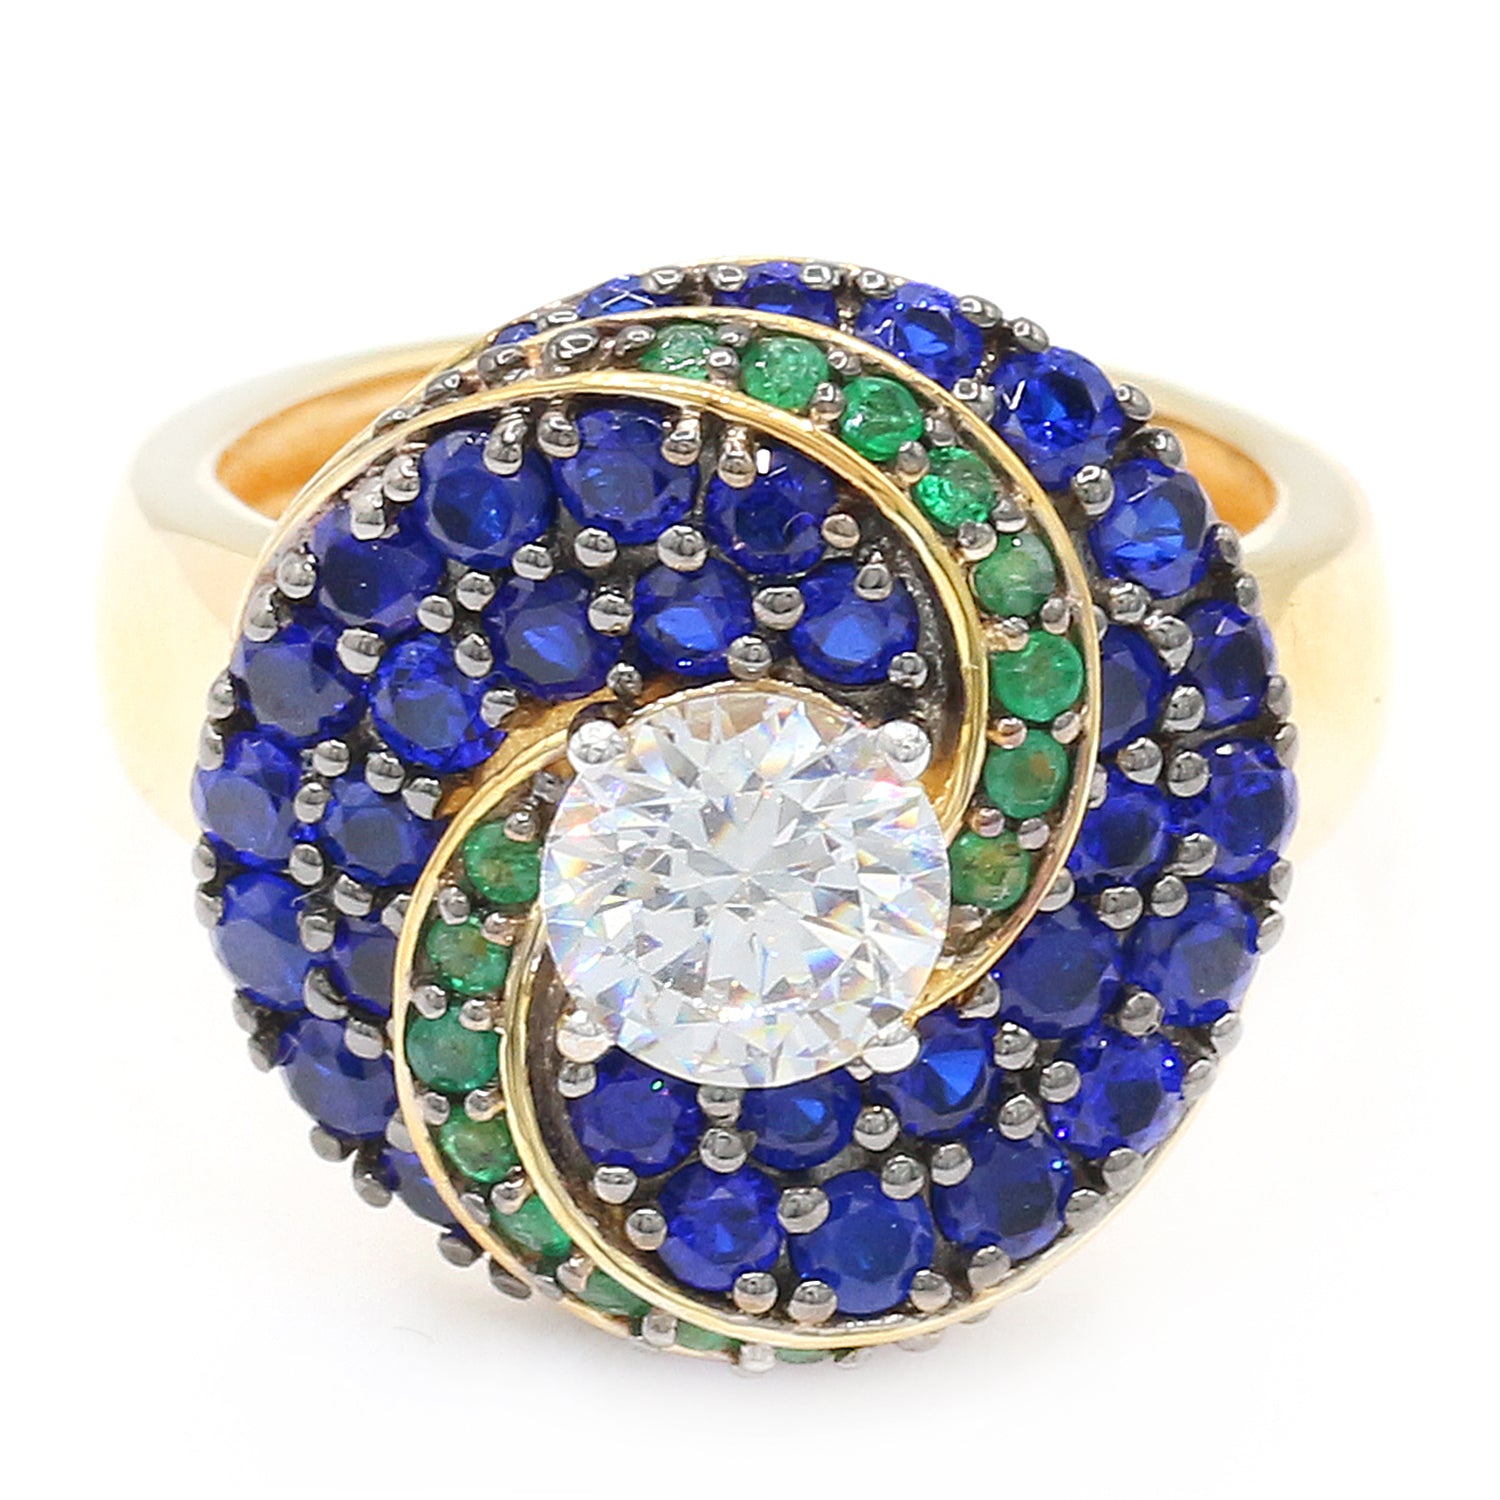 Limited Edition Gems en Vogue Luxe, One-of-a-kind IGI Certified Over 1ct Lab Grown Diamond, Cobalt Blue Spinel & Emerald Ring